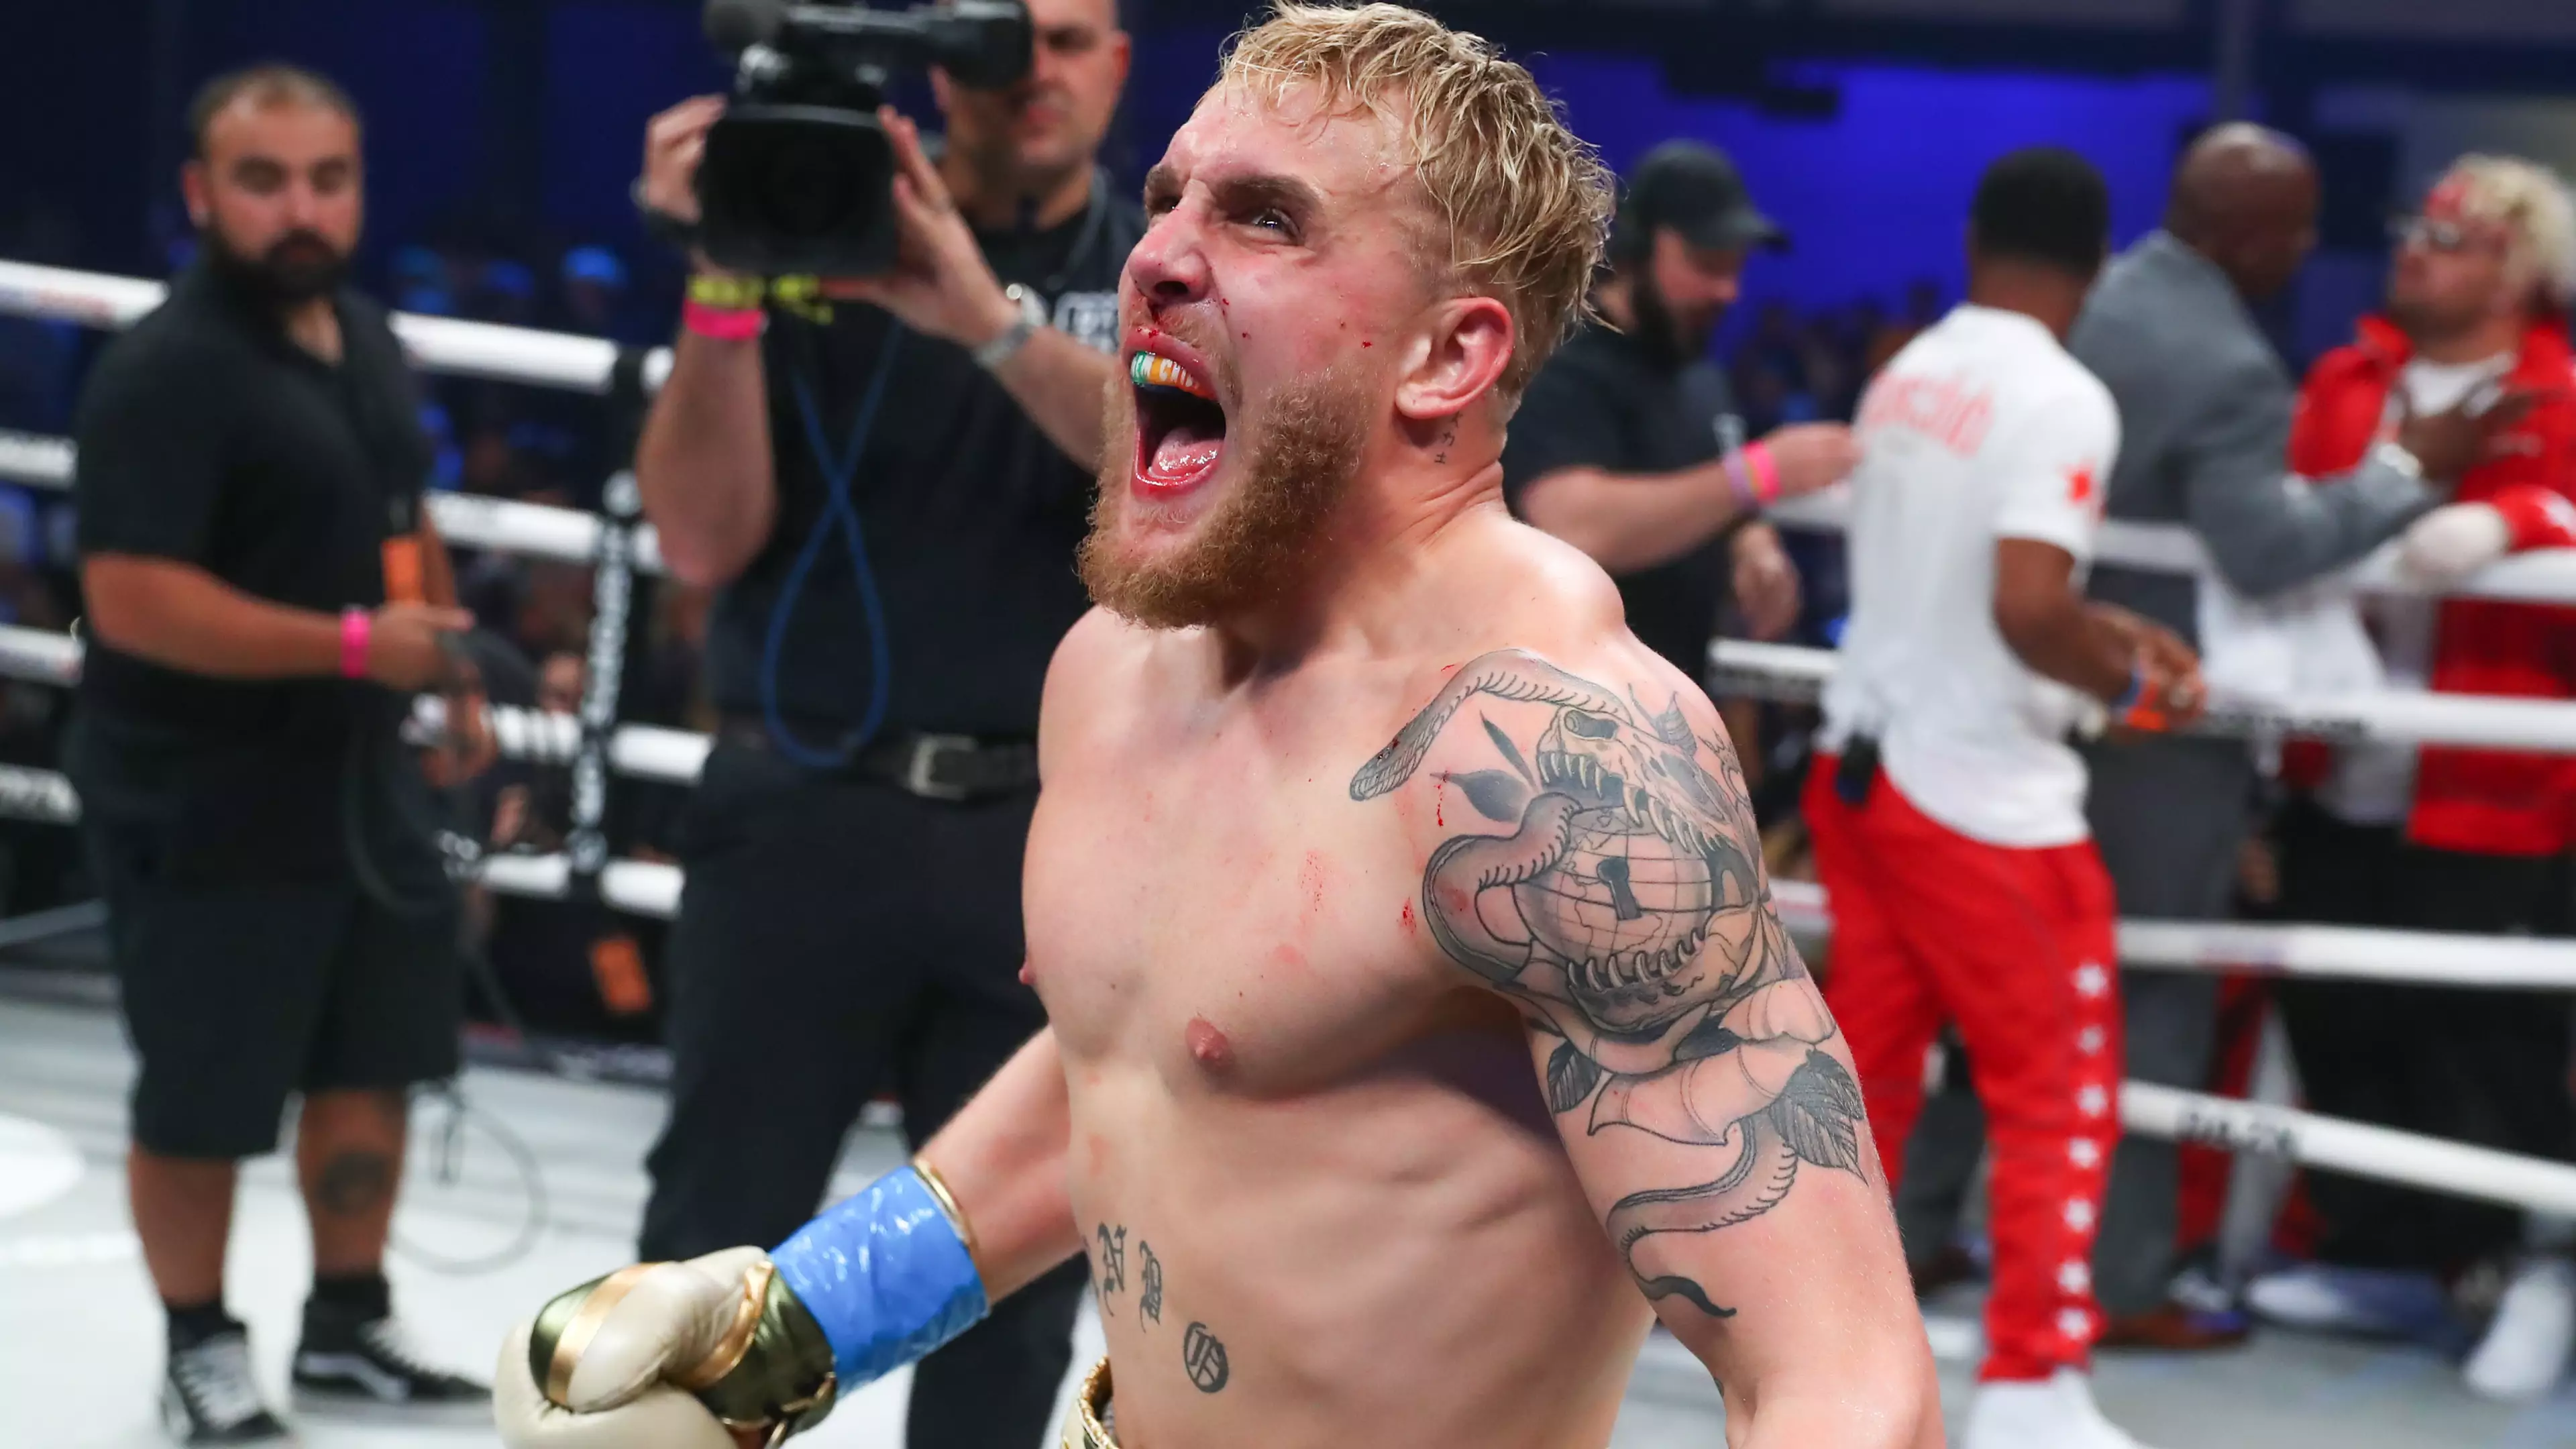 Jake Paul Reckons He Could Soon Make $1 Billion From Boxing